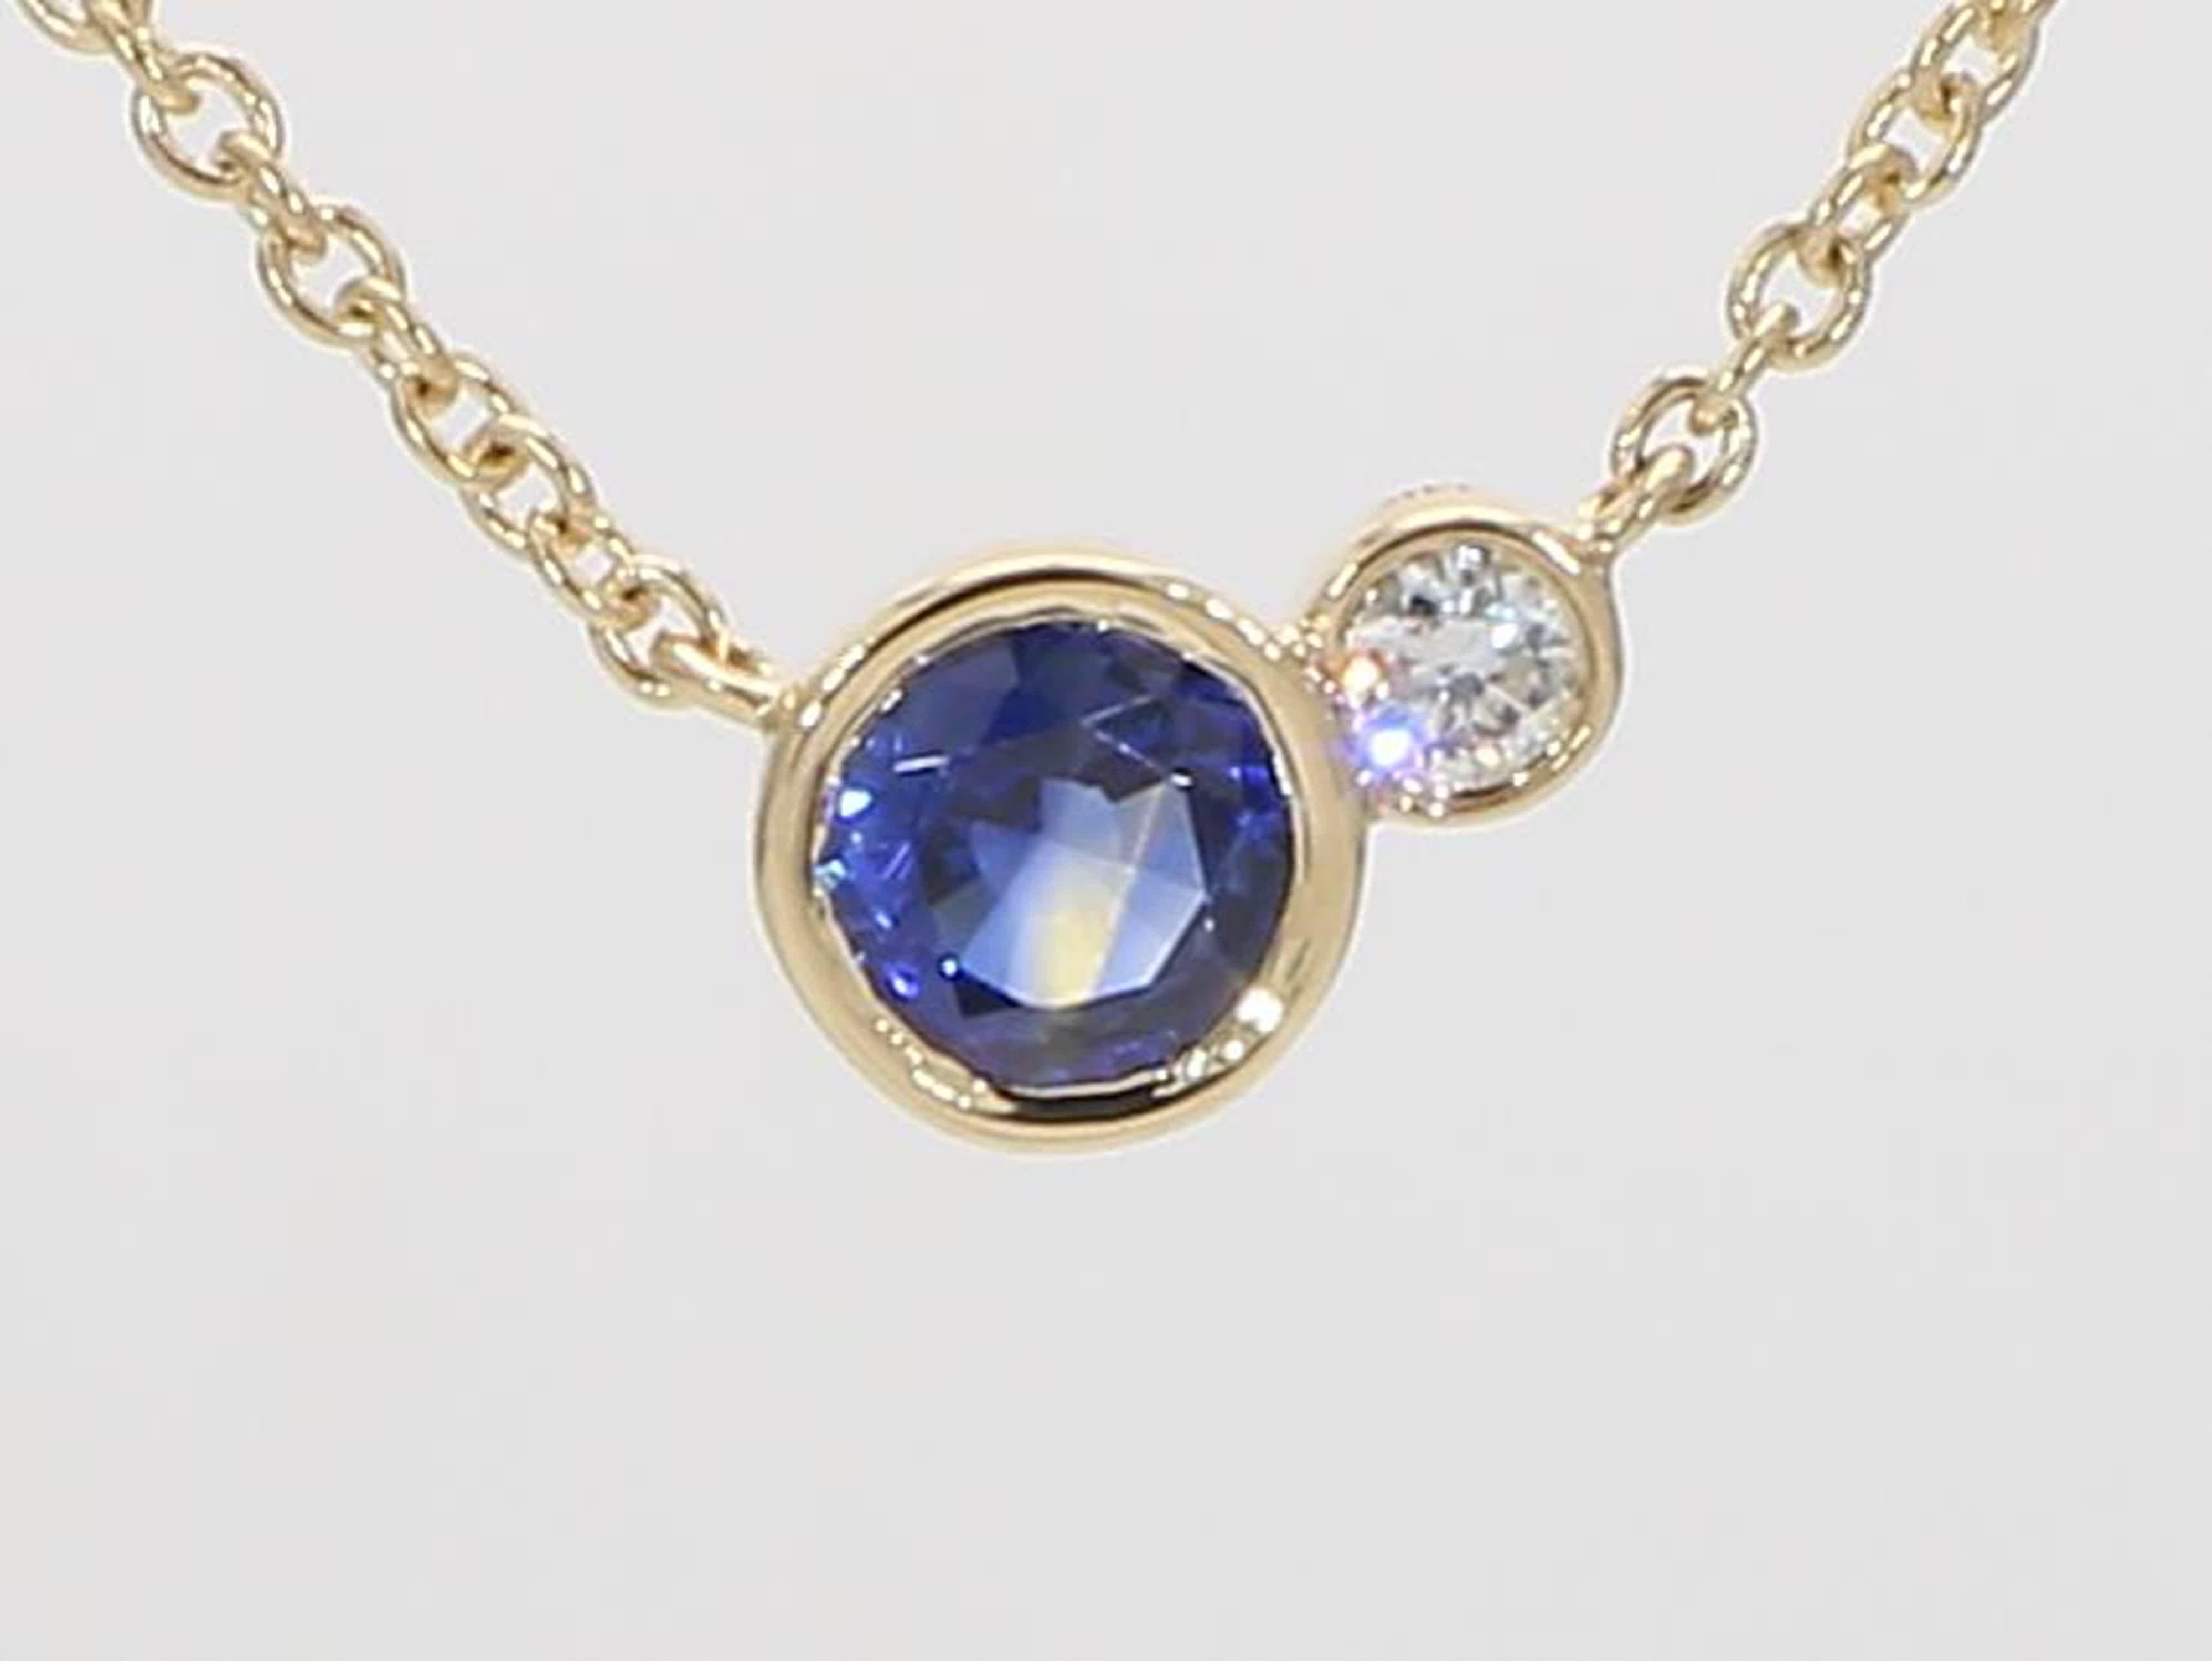 RareGemWorld's classic sapphire pendant. Mounted in a beautiful 14 Yellow Gold setting with a natural round cut blue sapphire. The sapphire is complimented by a natural round cut white diamond. This pendant is guaranteed to impress and enhance your